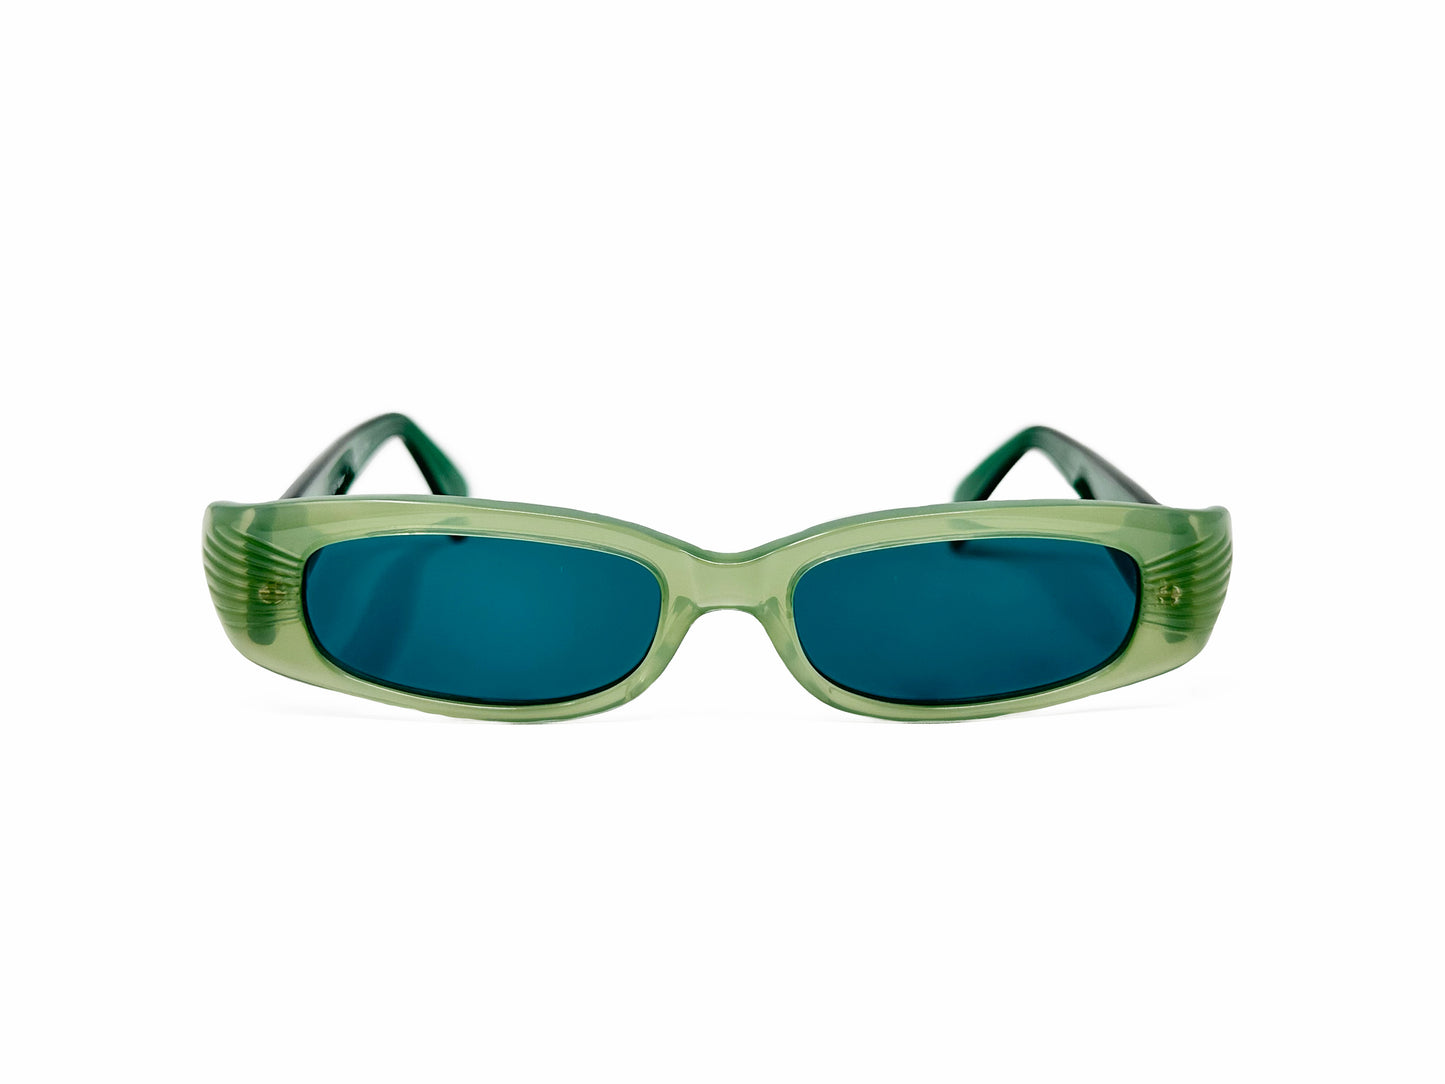 Kador rectangular, acetate sunglass with wing design on sides. Model: DF2008. Color: 1653/1487 - light, semi-transparent emerald green with blue lenses. Front view.